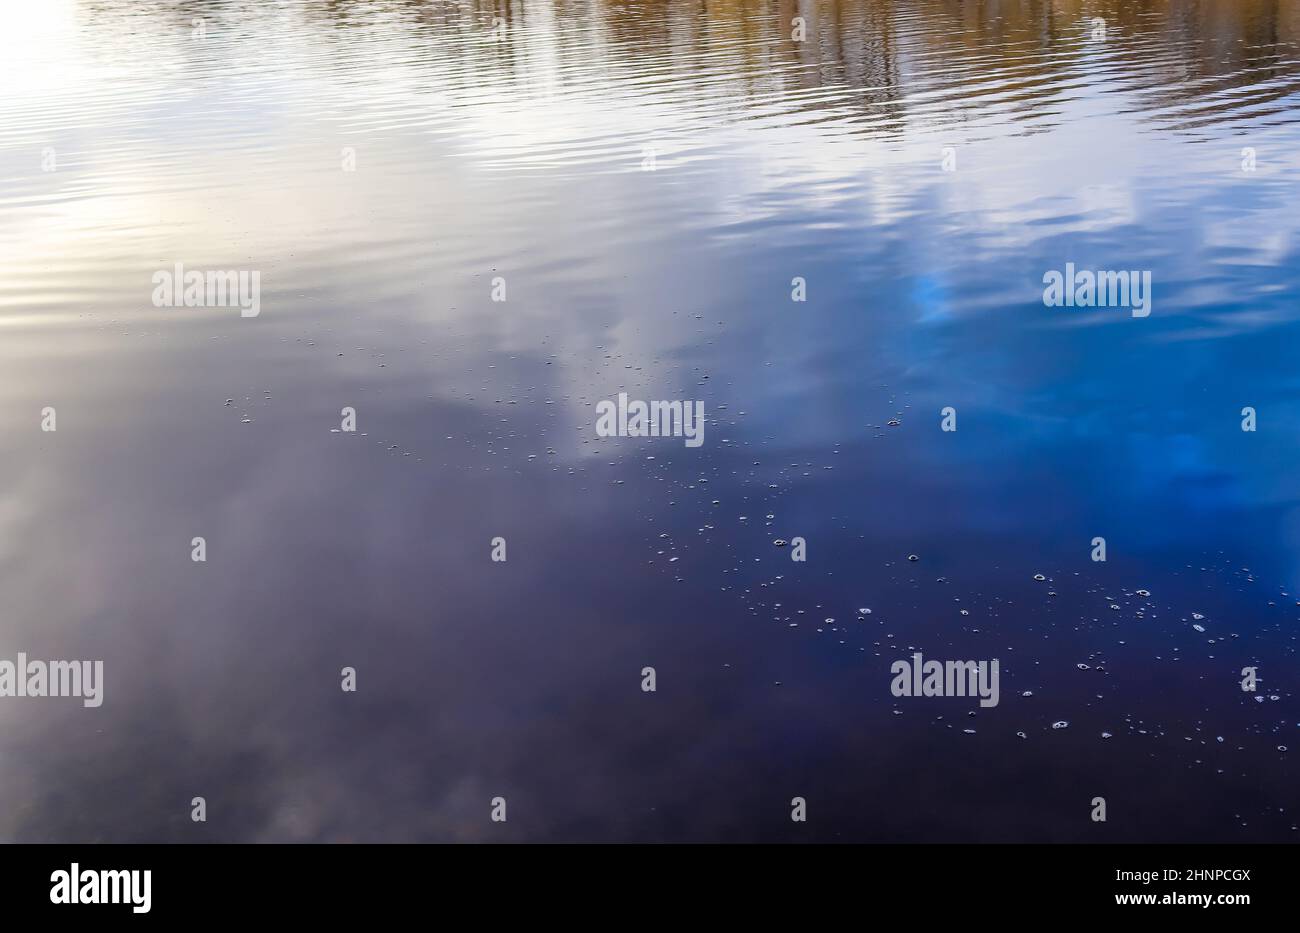 Detailed close up view on water surfaces with waves and ripples and the sunlight reflecting at the surface Stock Photo